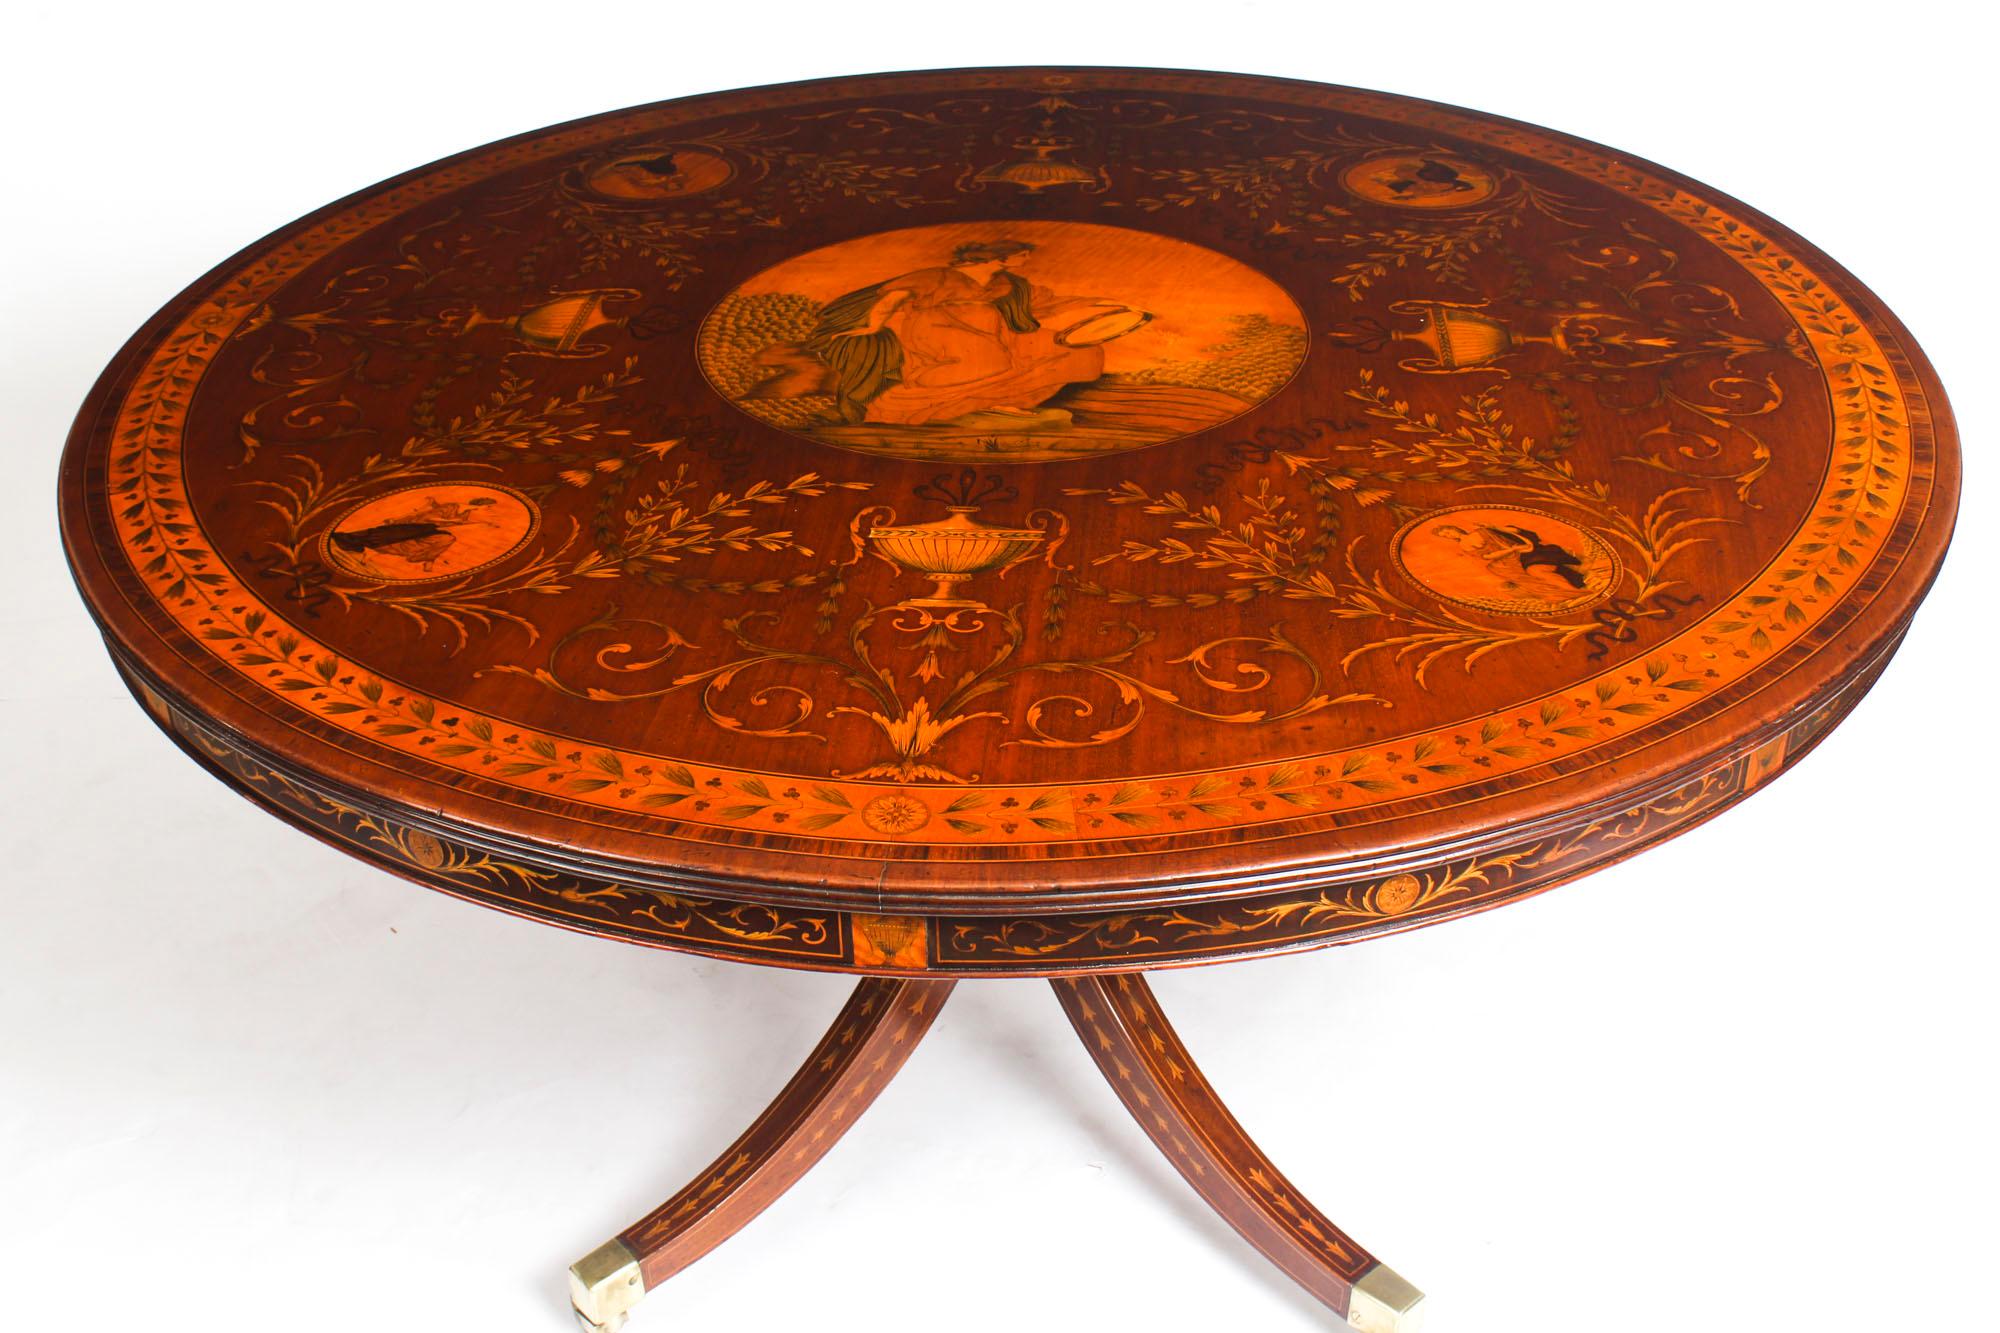 This is a fine exhibition quality English antique Victorian mahogany marquetry centre table attributed to the London master cabinet makers Edwards & Roberts, circa 1880 in date.
 
The circular table features the very highest quality satinwood